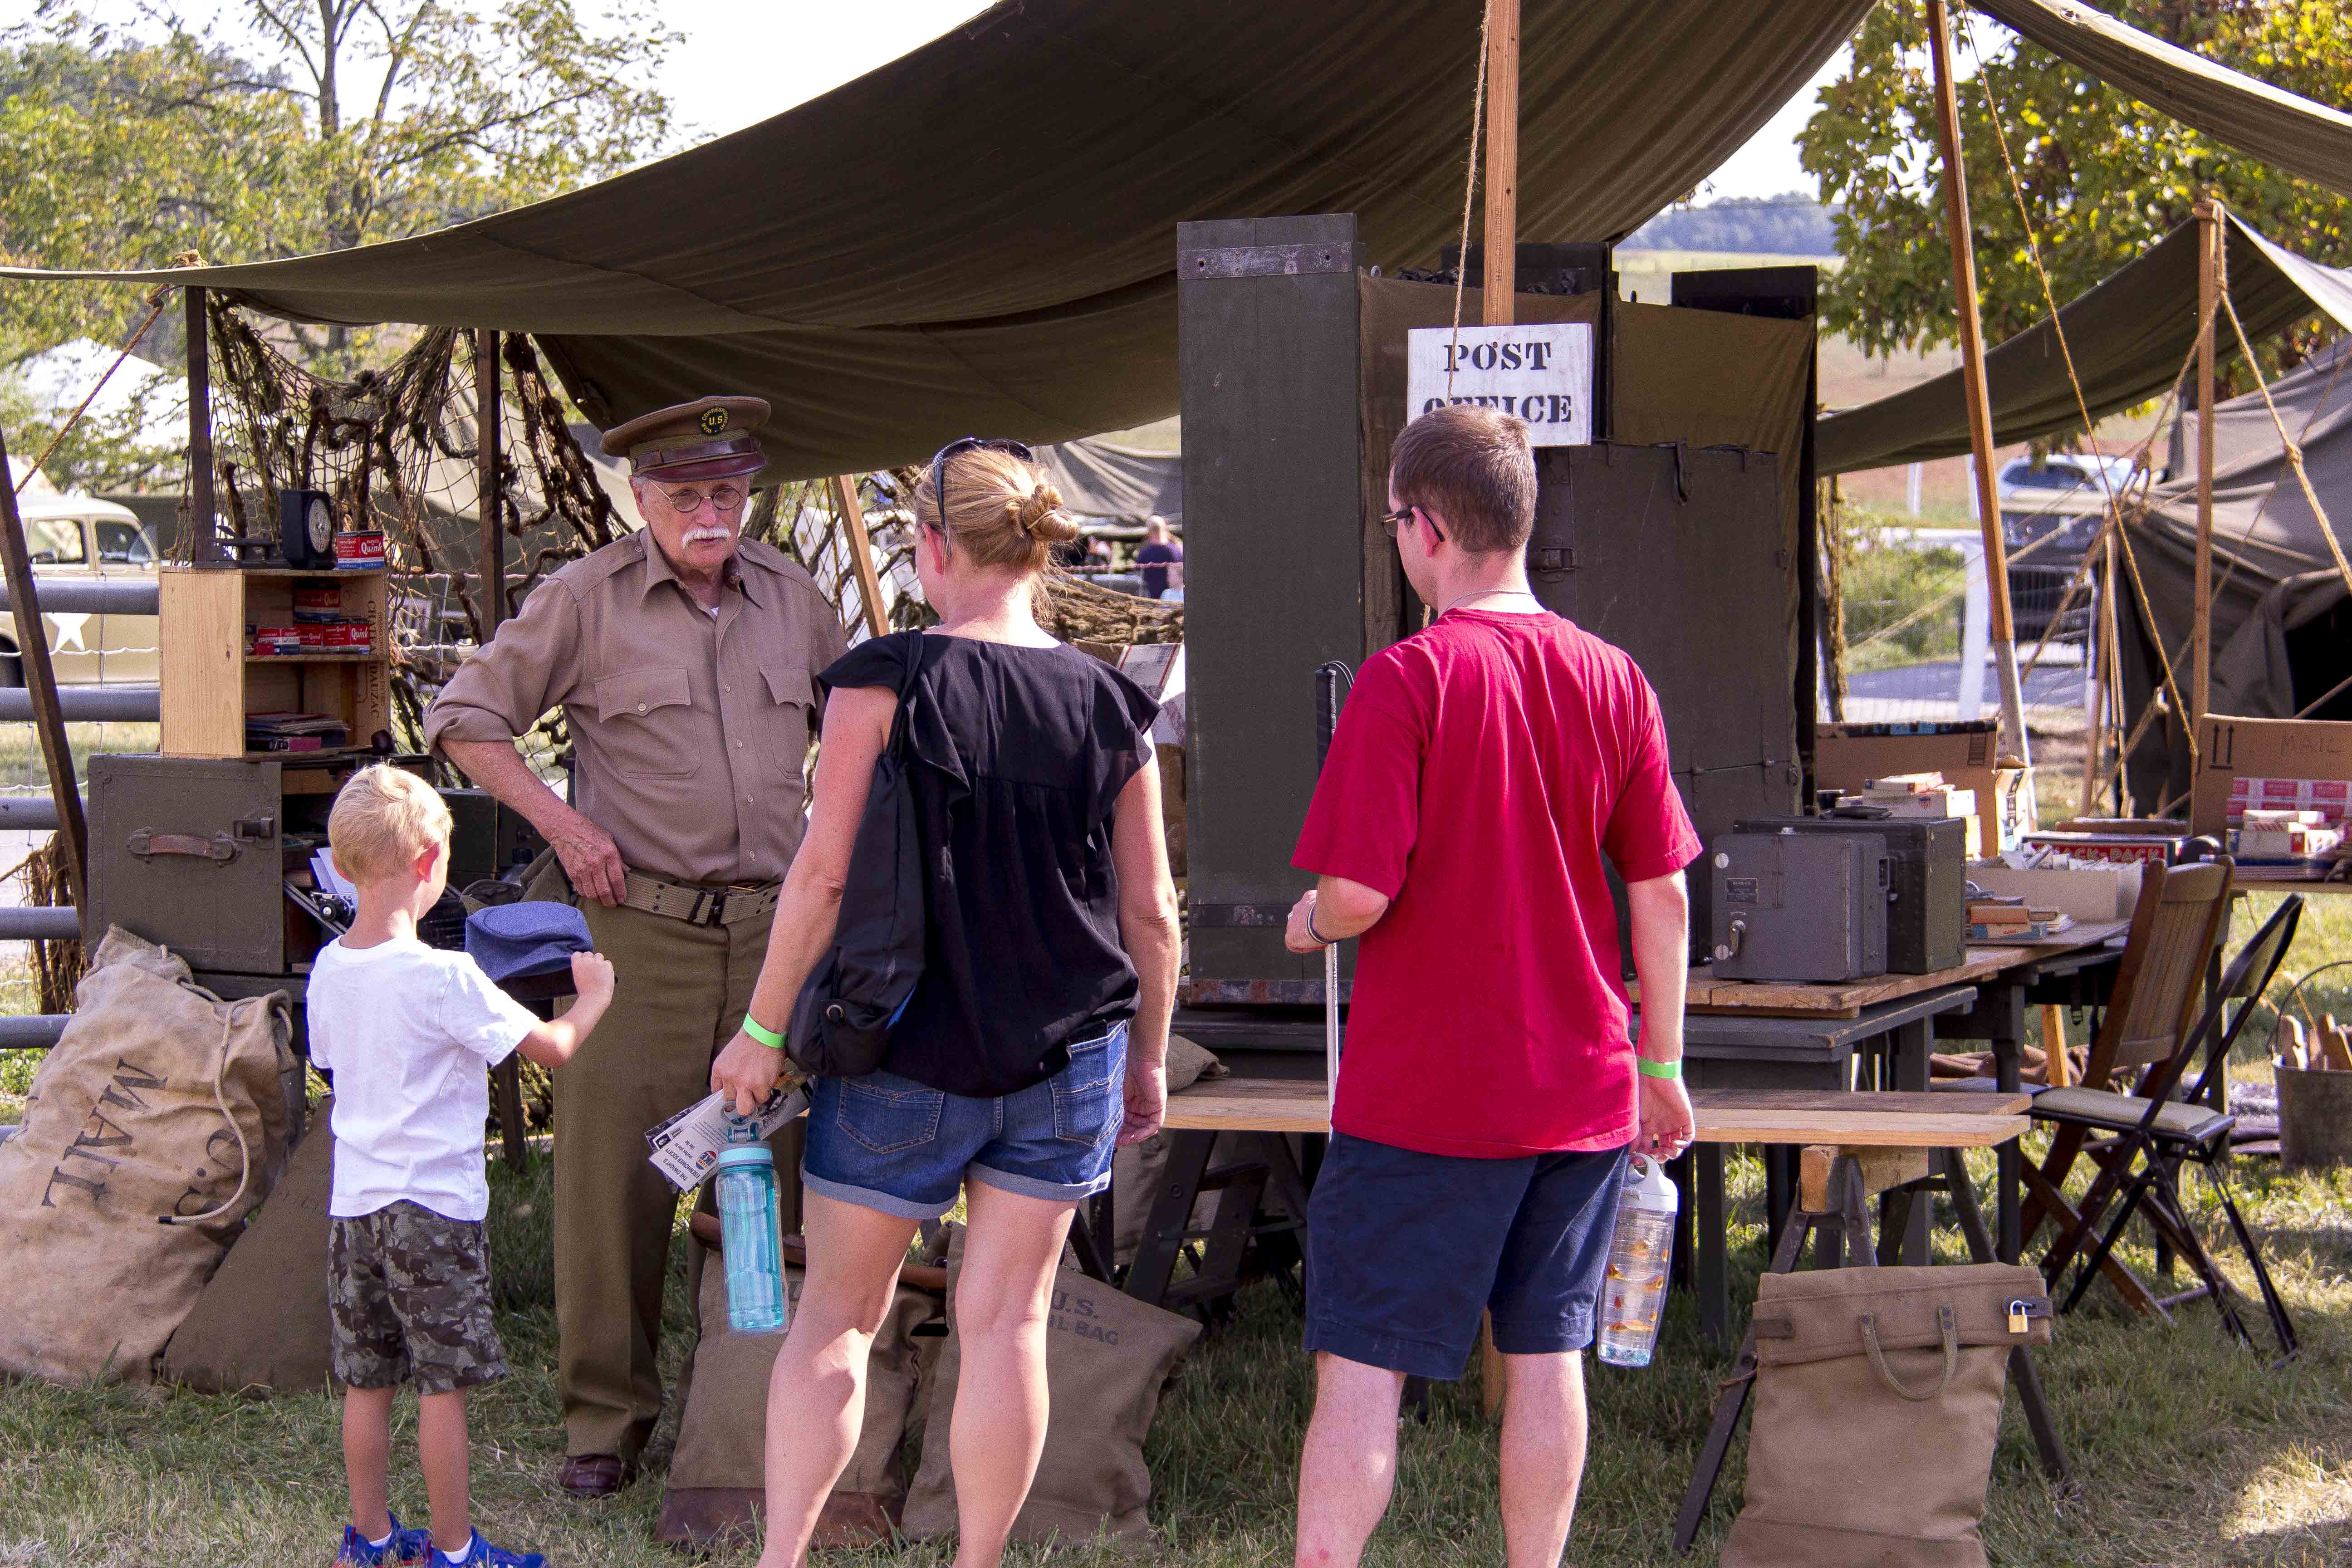 A family of three talks with a World War II living historian at his Post Office tent. There are tables with numerous boxes and shelves stack on top, full burlap mail bags sit on the ground.